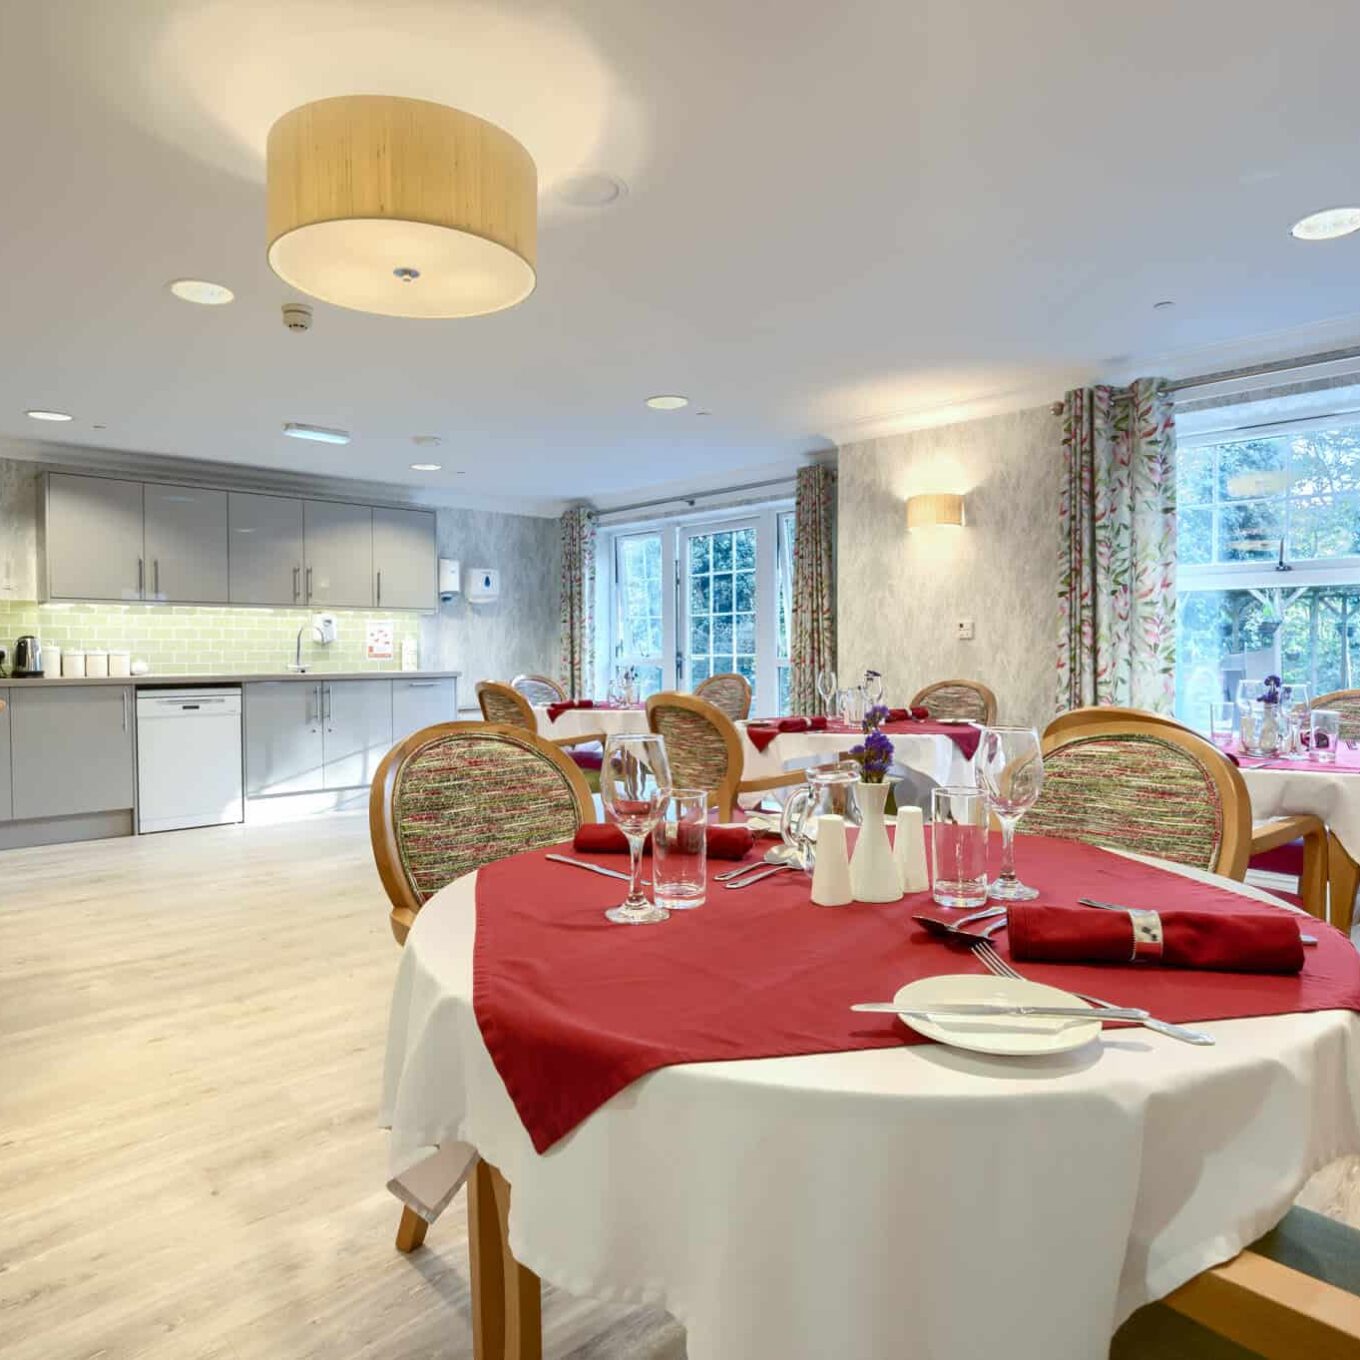 Dining room with tableware and kitchen area at Woodland Grove Care Home in Loughton